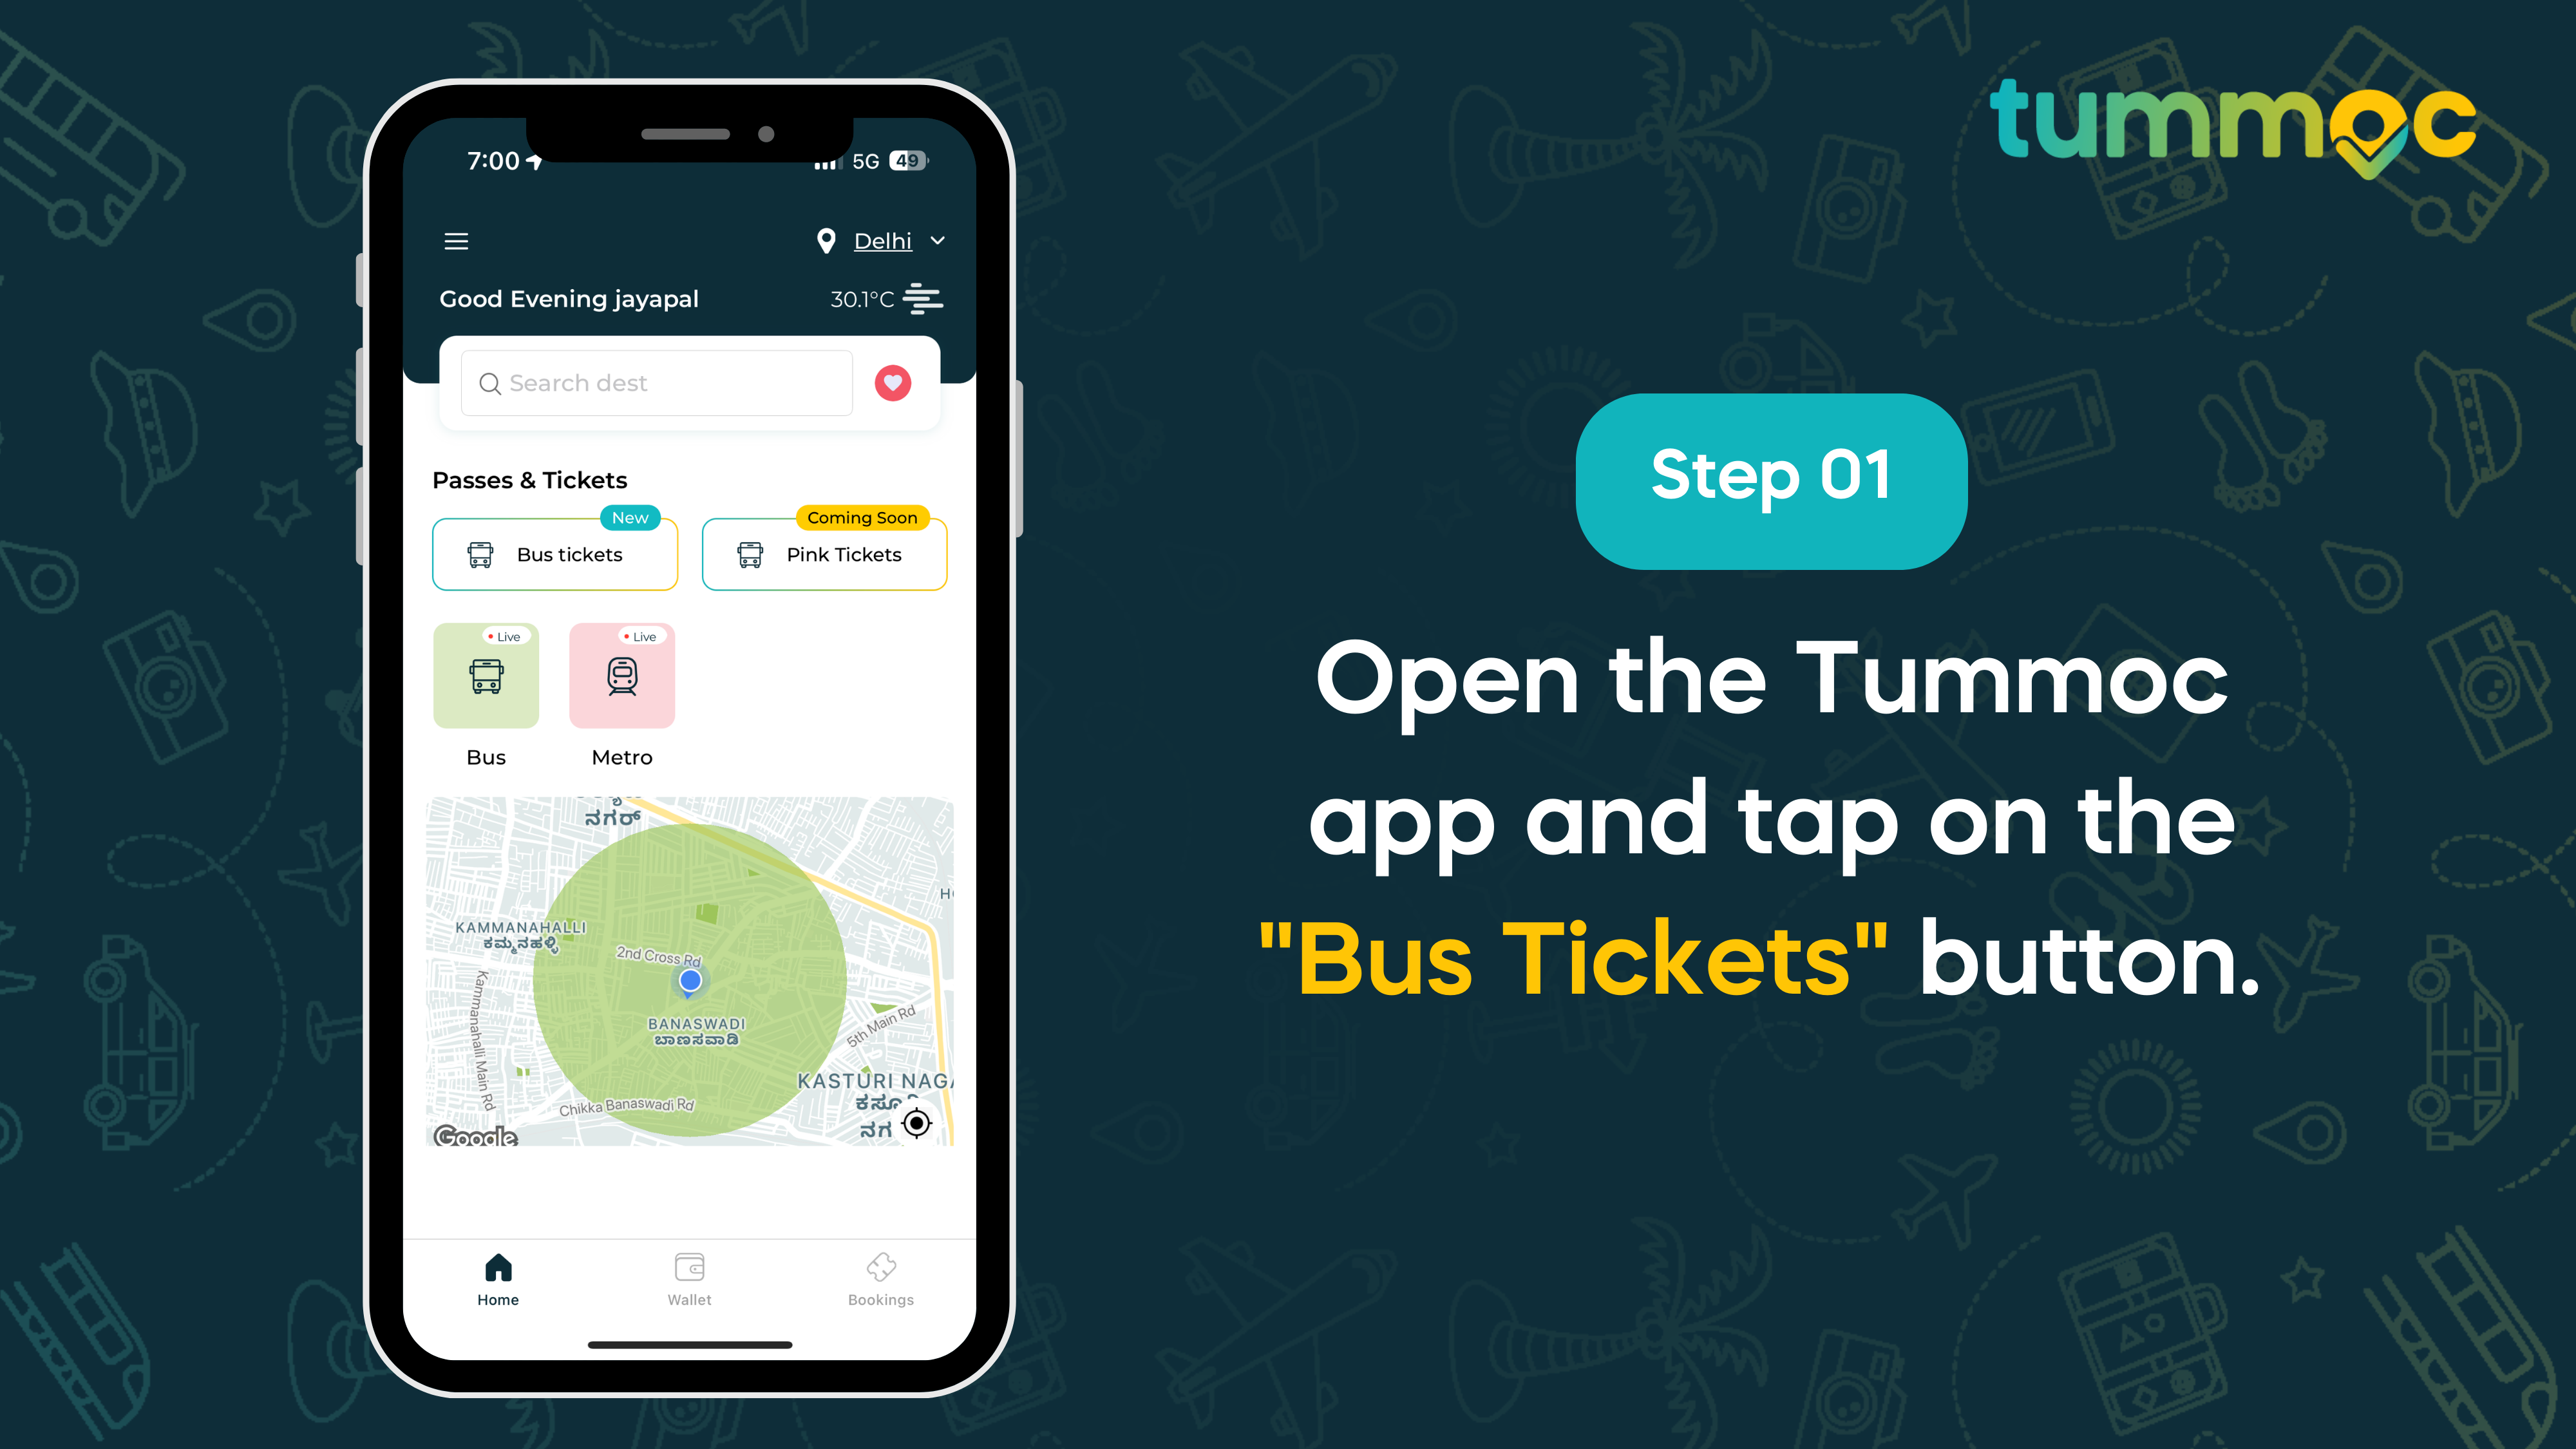 How to book DTC bus tickets on Tummoc